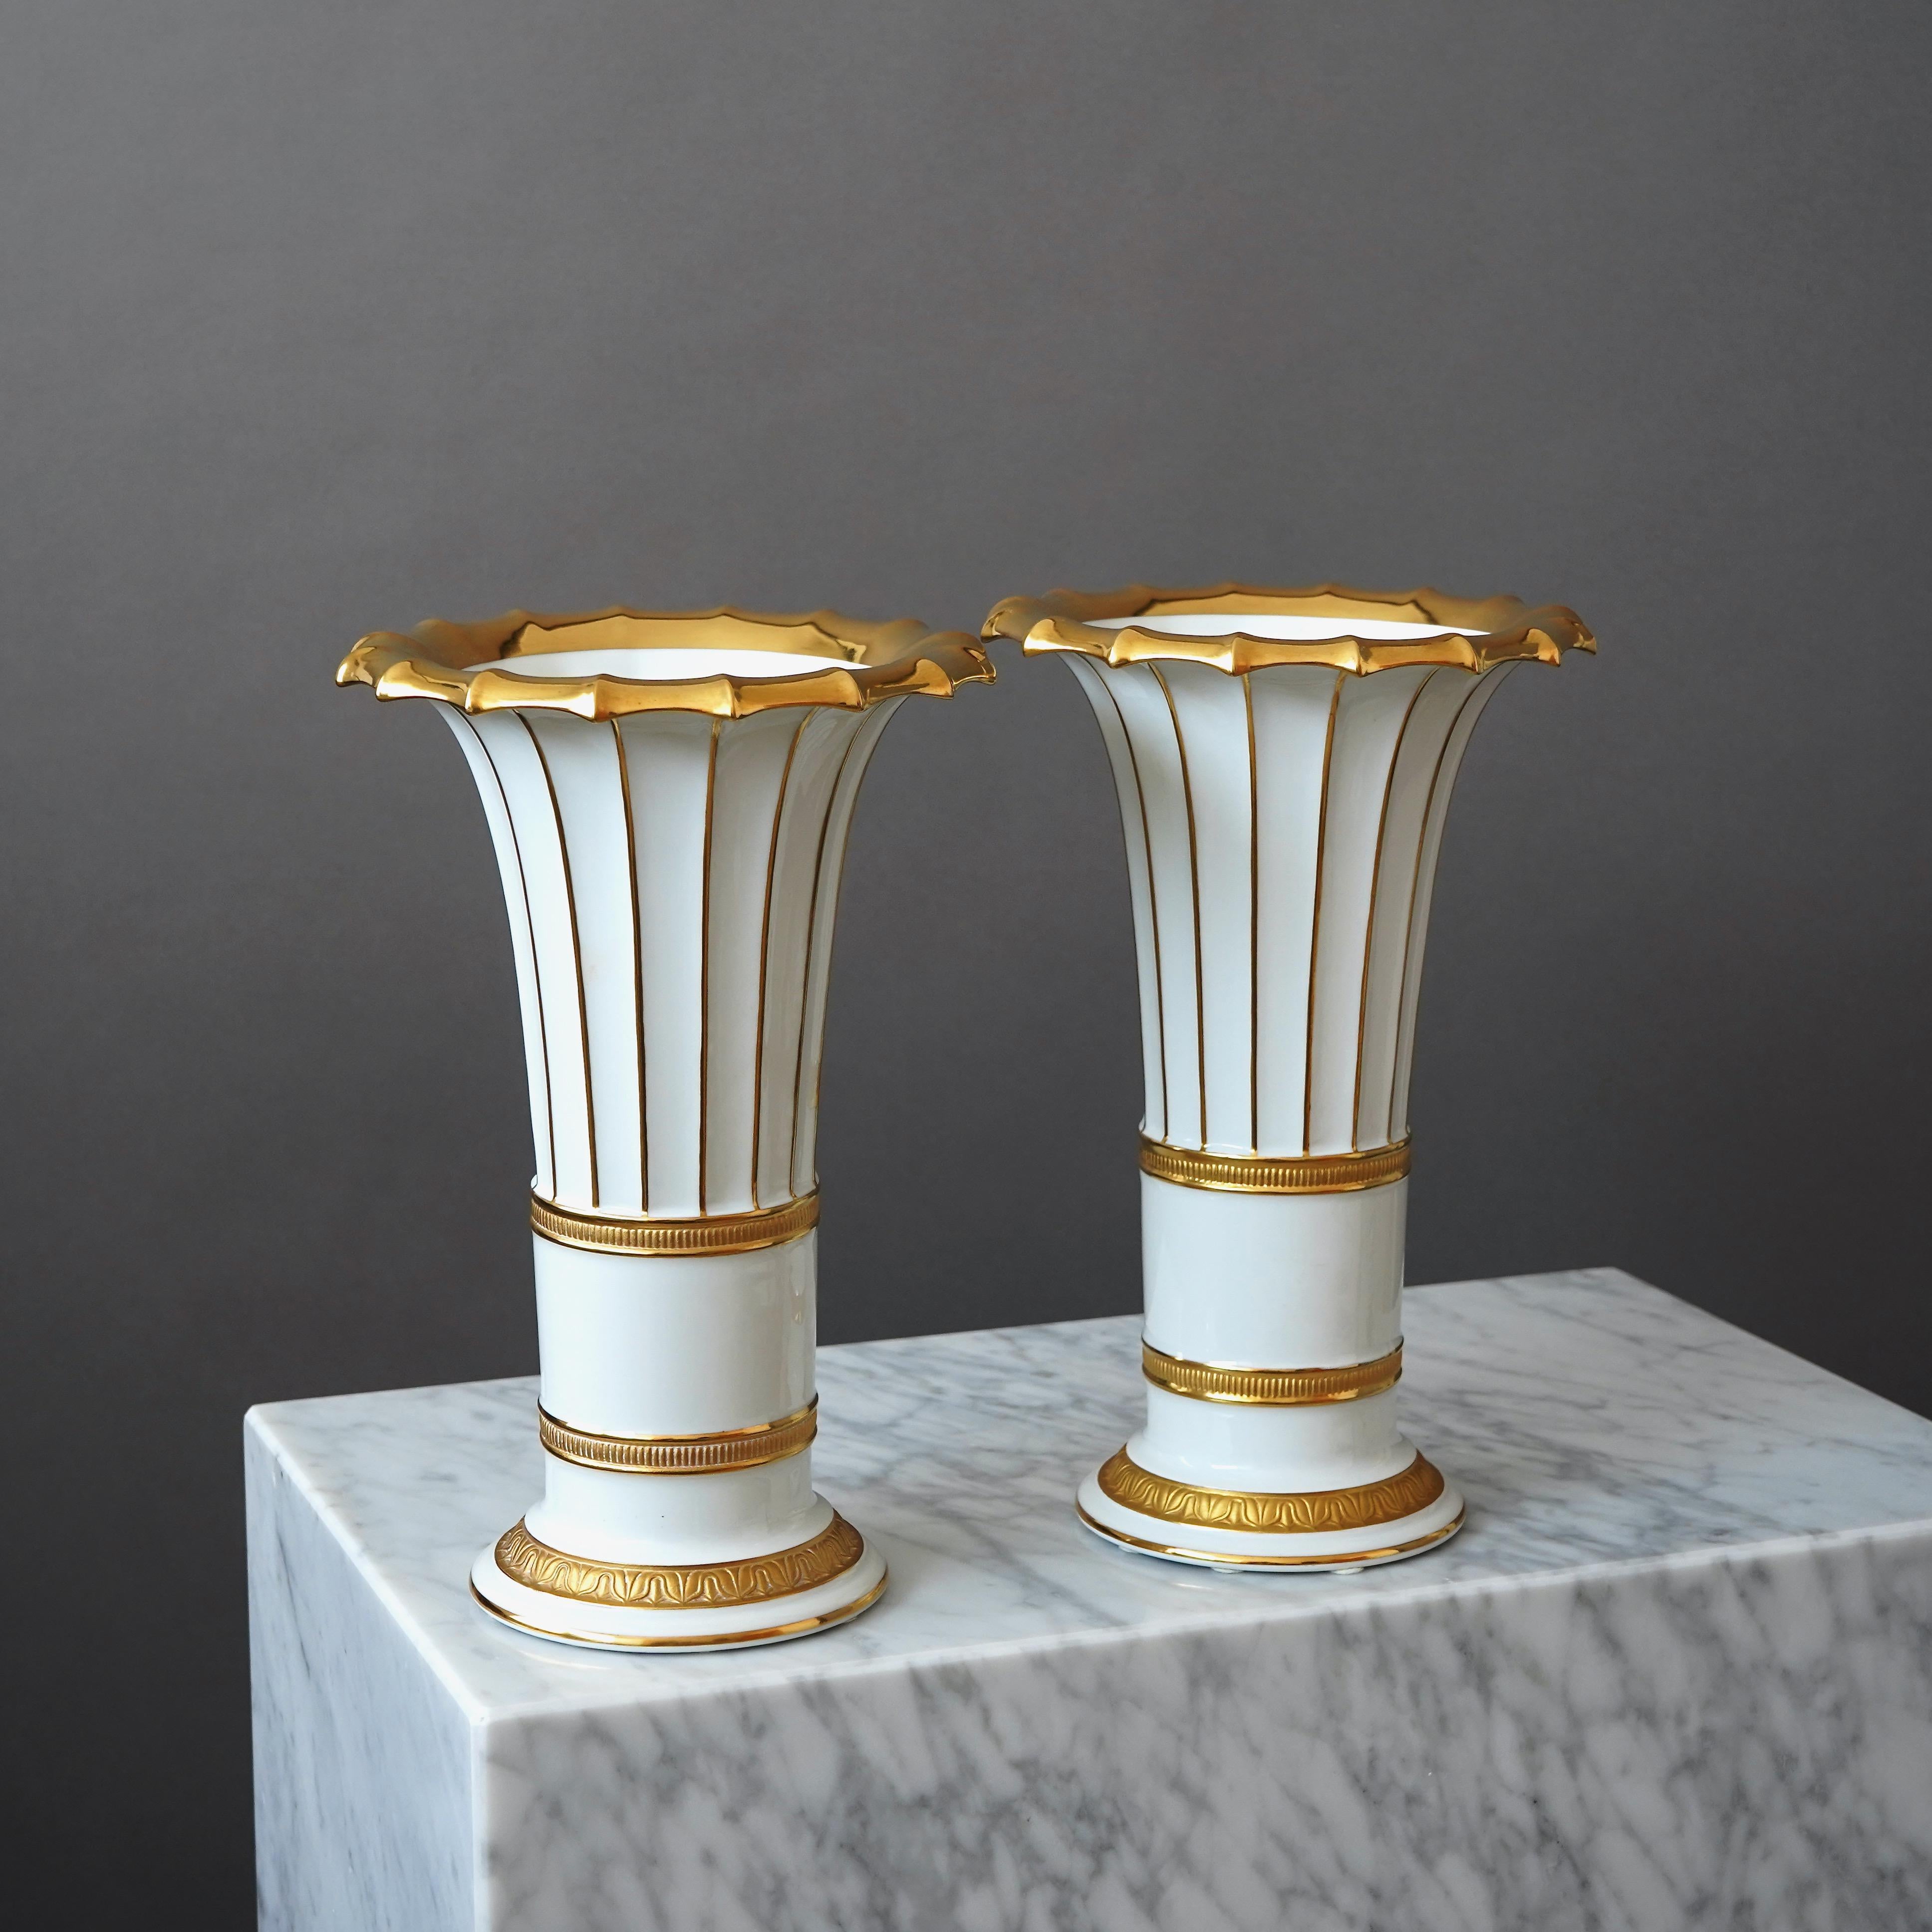 A pair of very elegant and well crafted Royal Copenhagen vases with gilded hand painted details.
Designed by Gustav Friedrich Hetsch. Made by ROYAL COPENHAGEN in Denmark, 1957.

Excellent condition. Makers marks on base of vases.